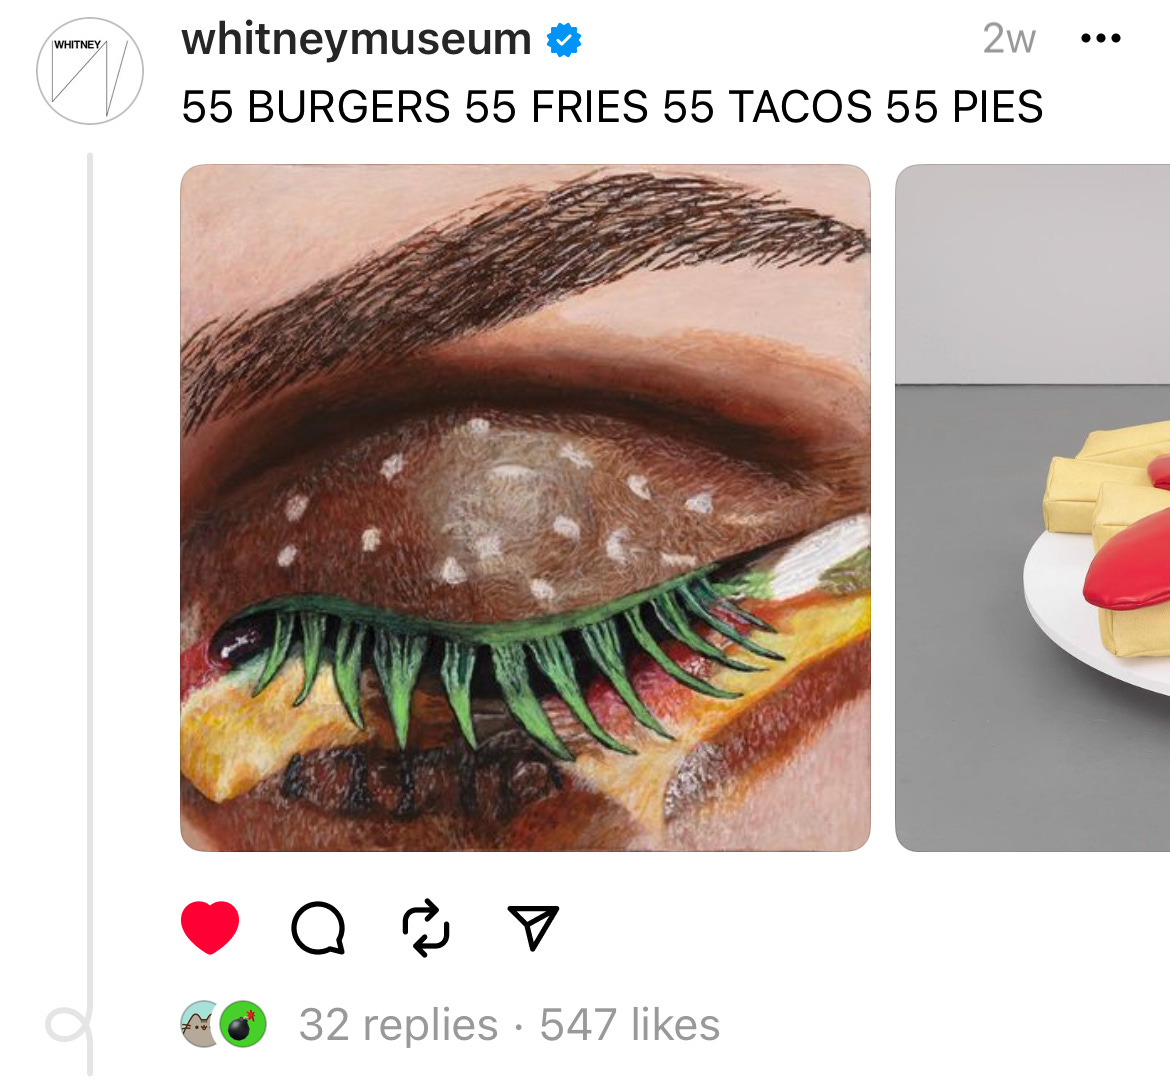 Post that referenced a meme that says "55 BURGERS 55 FRIES 55 TACOS 55 PIES" with art that looks like each of those things.